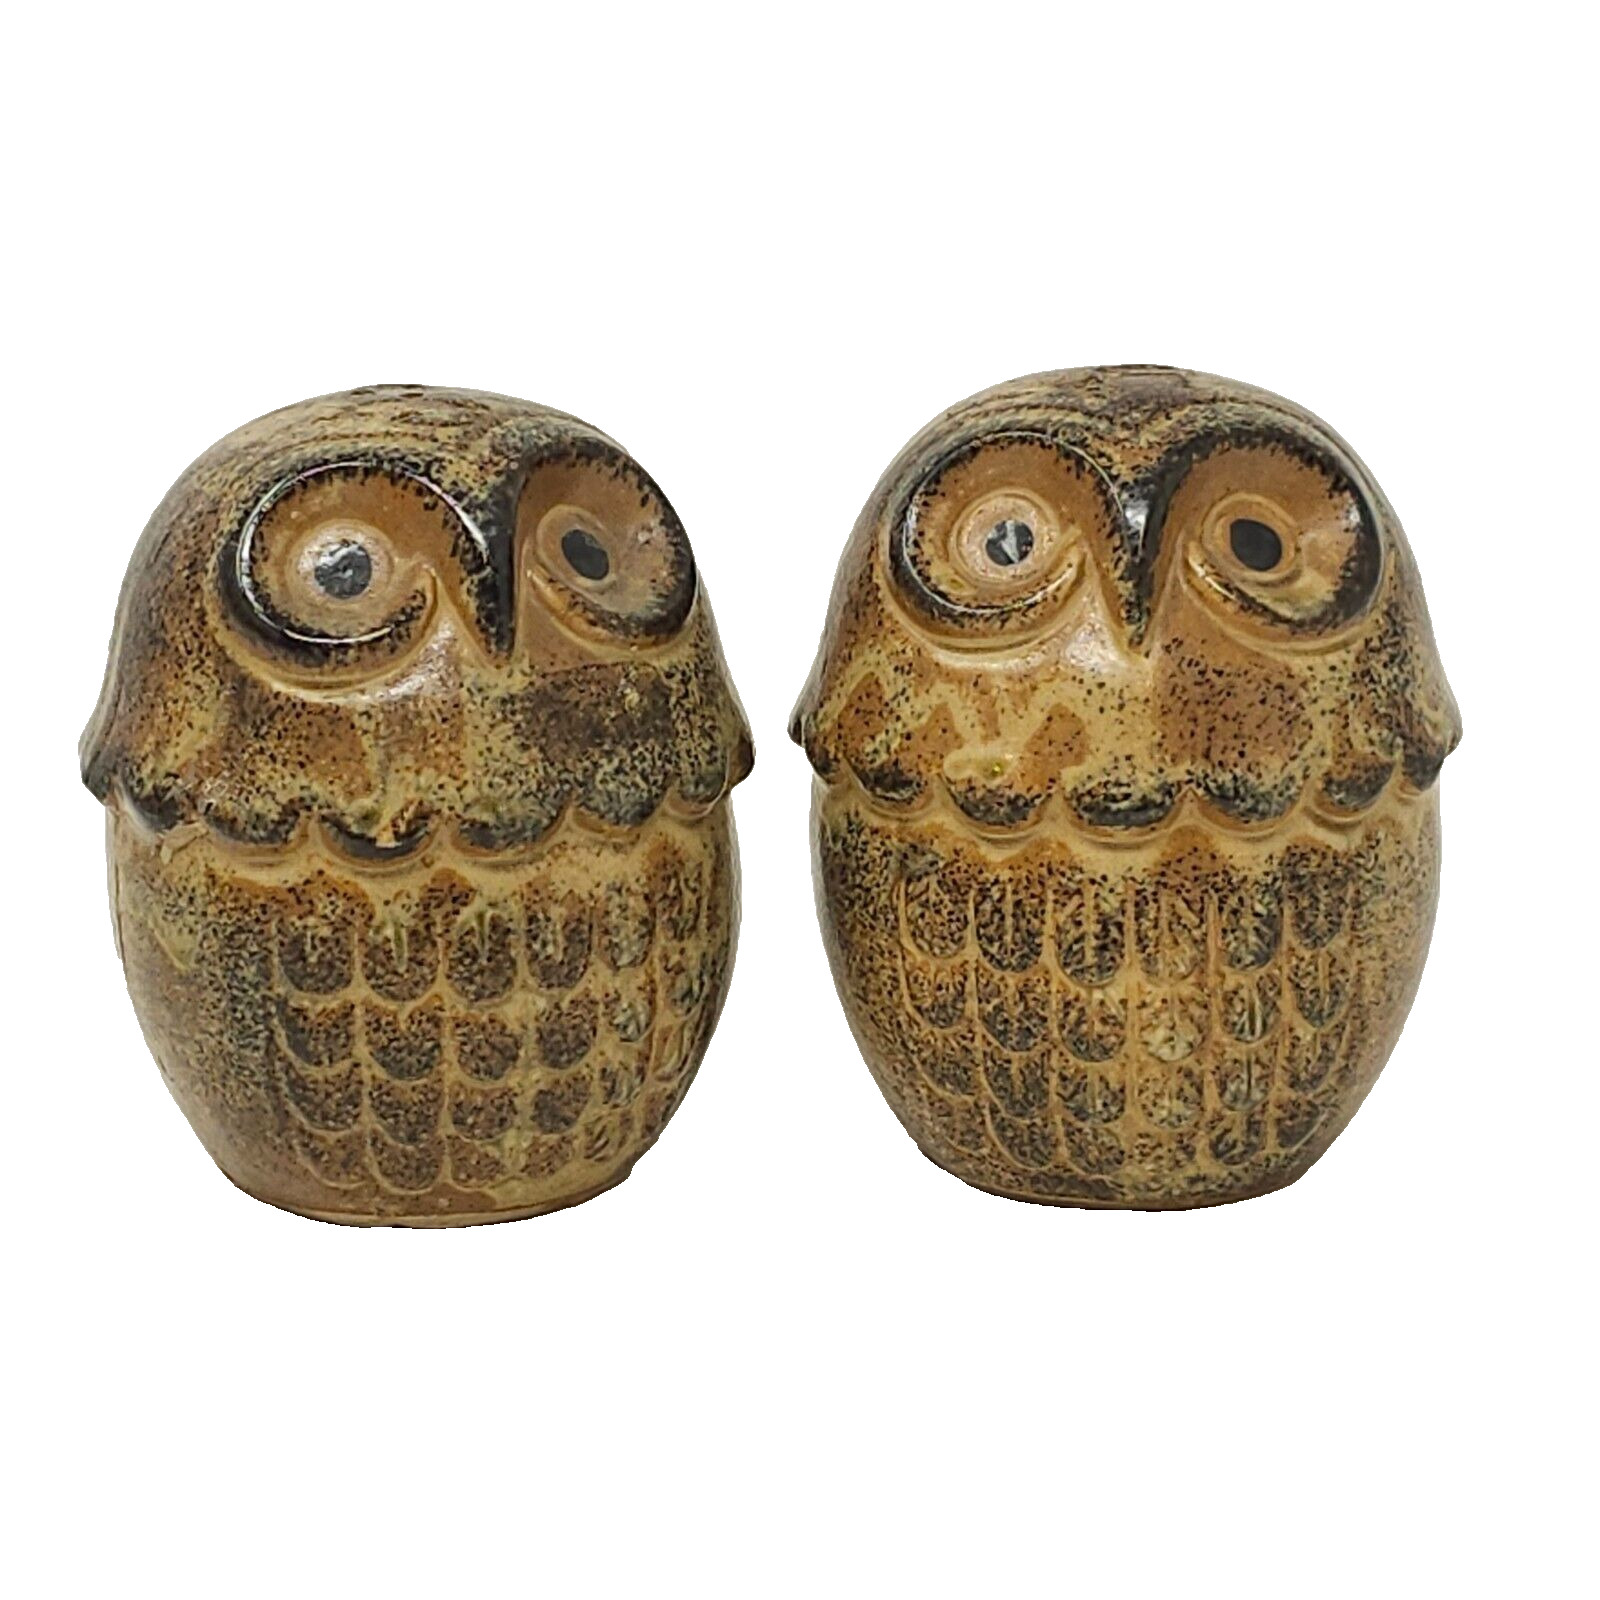 Glazed Pottery Owl Kitchen Salt and Pepper Shakers